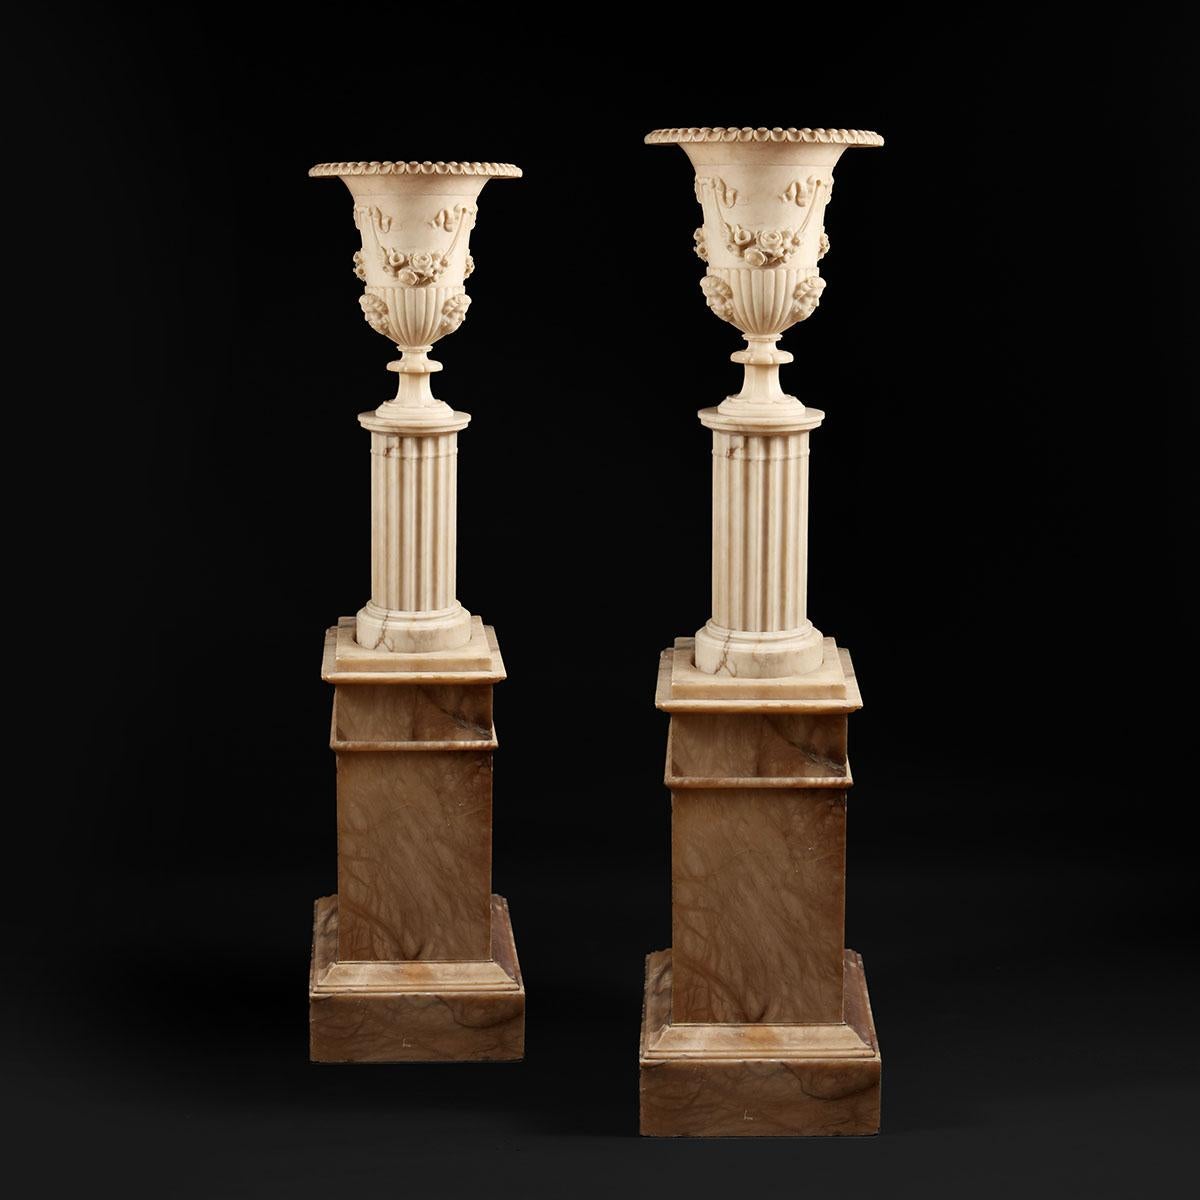 Floor standing classically carved alabaster vases on fluted columns and square stepped pedestals Carved with Satyre masks and foliate swags suspended from ribbons. Electrified and Illuminated throughout, including the base, the column, and the